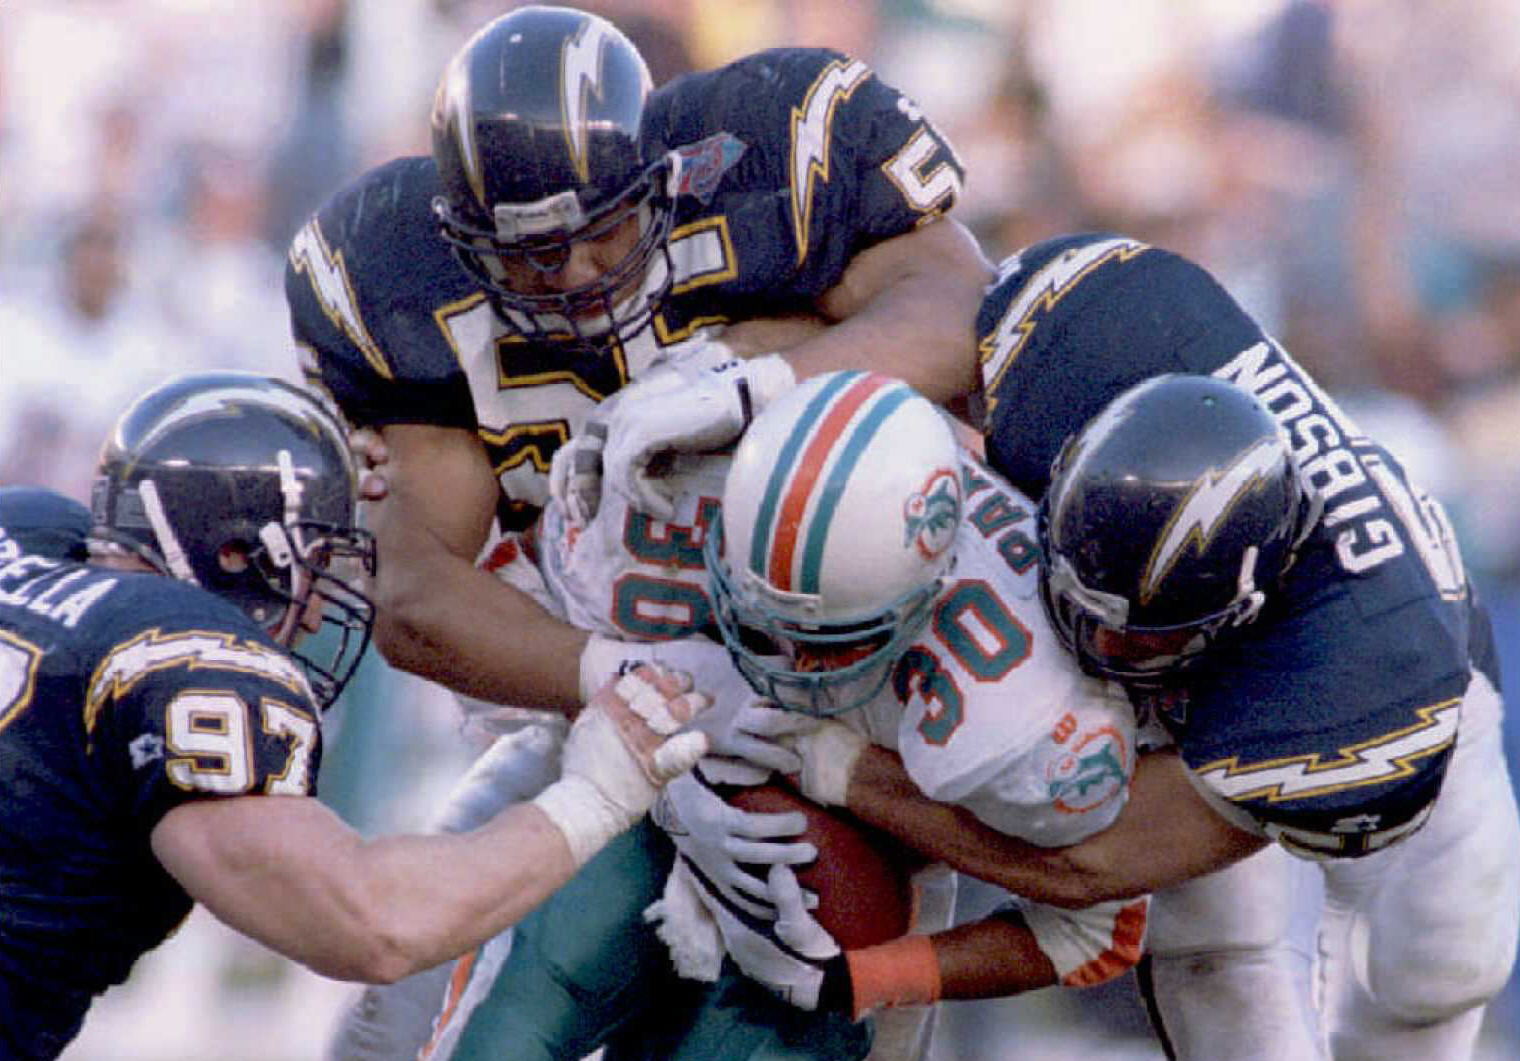 Junior Seau is one of the greatest NFL linebackers in league history